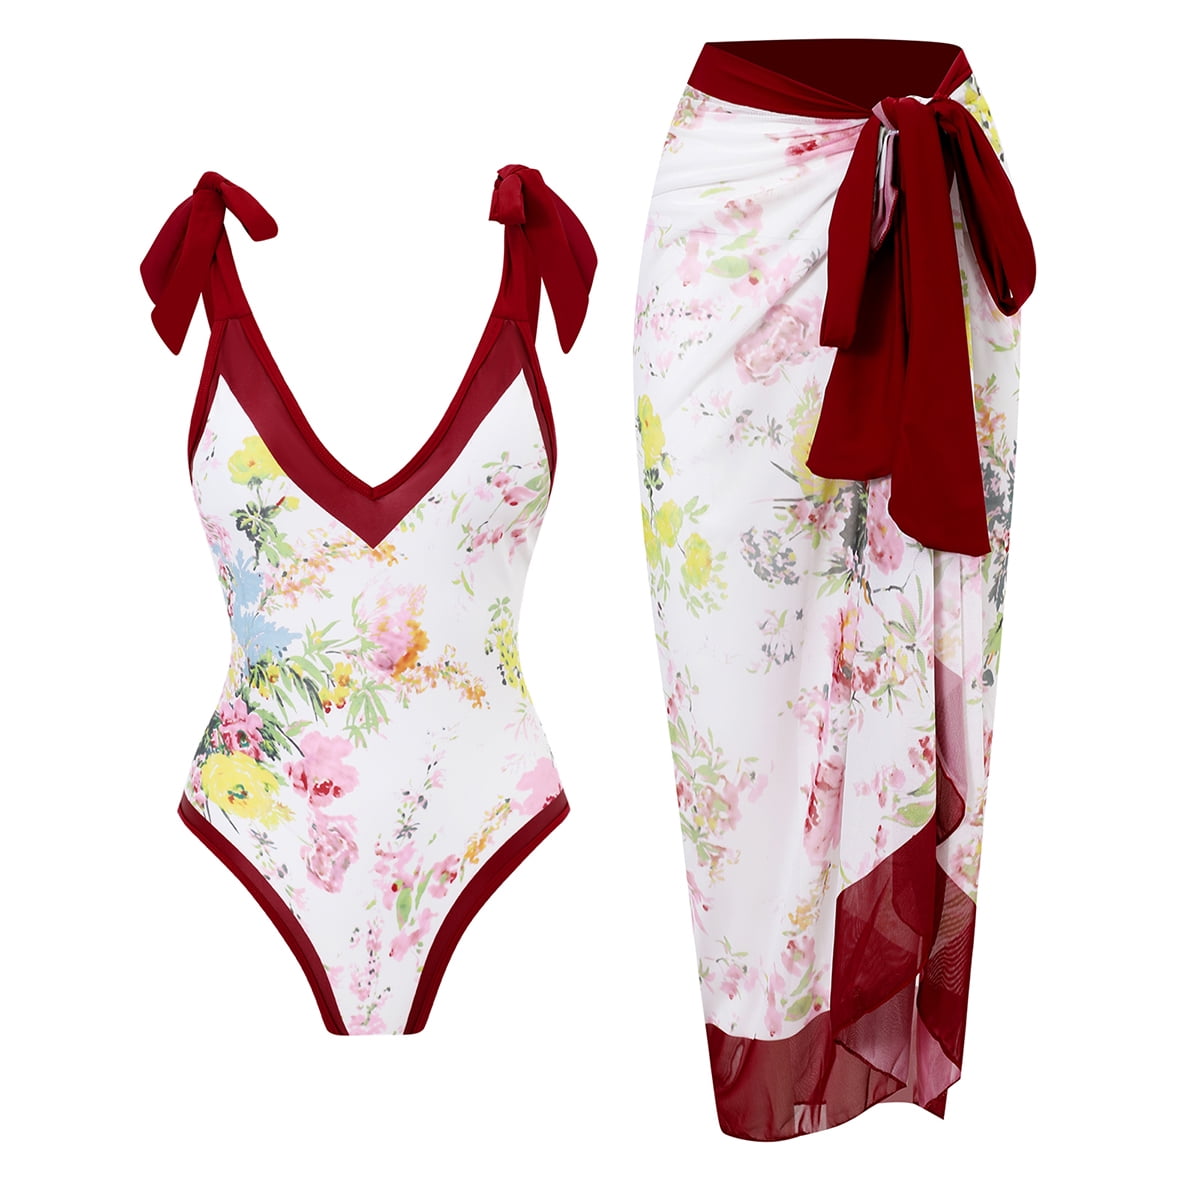 IMEKIS 2 Piece Swimsuits for Women Floral One Piece Swimwear with Beach ...